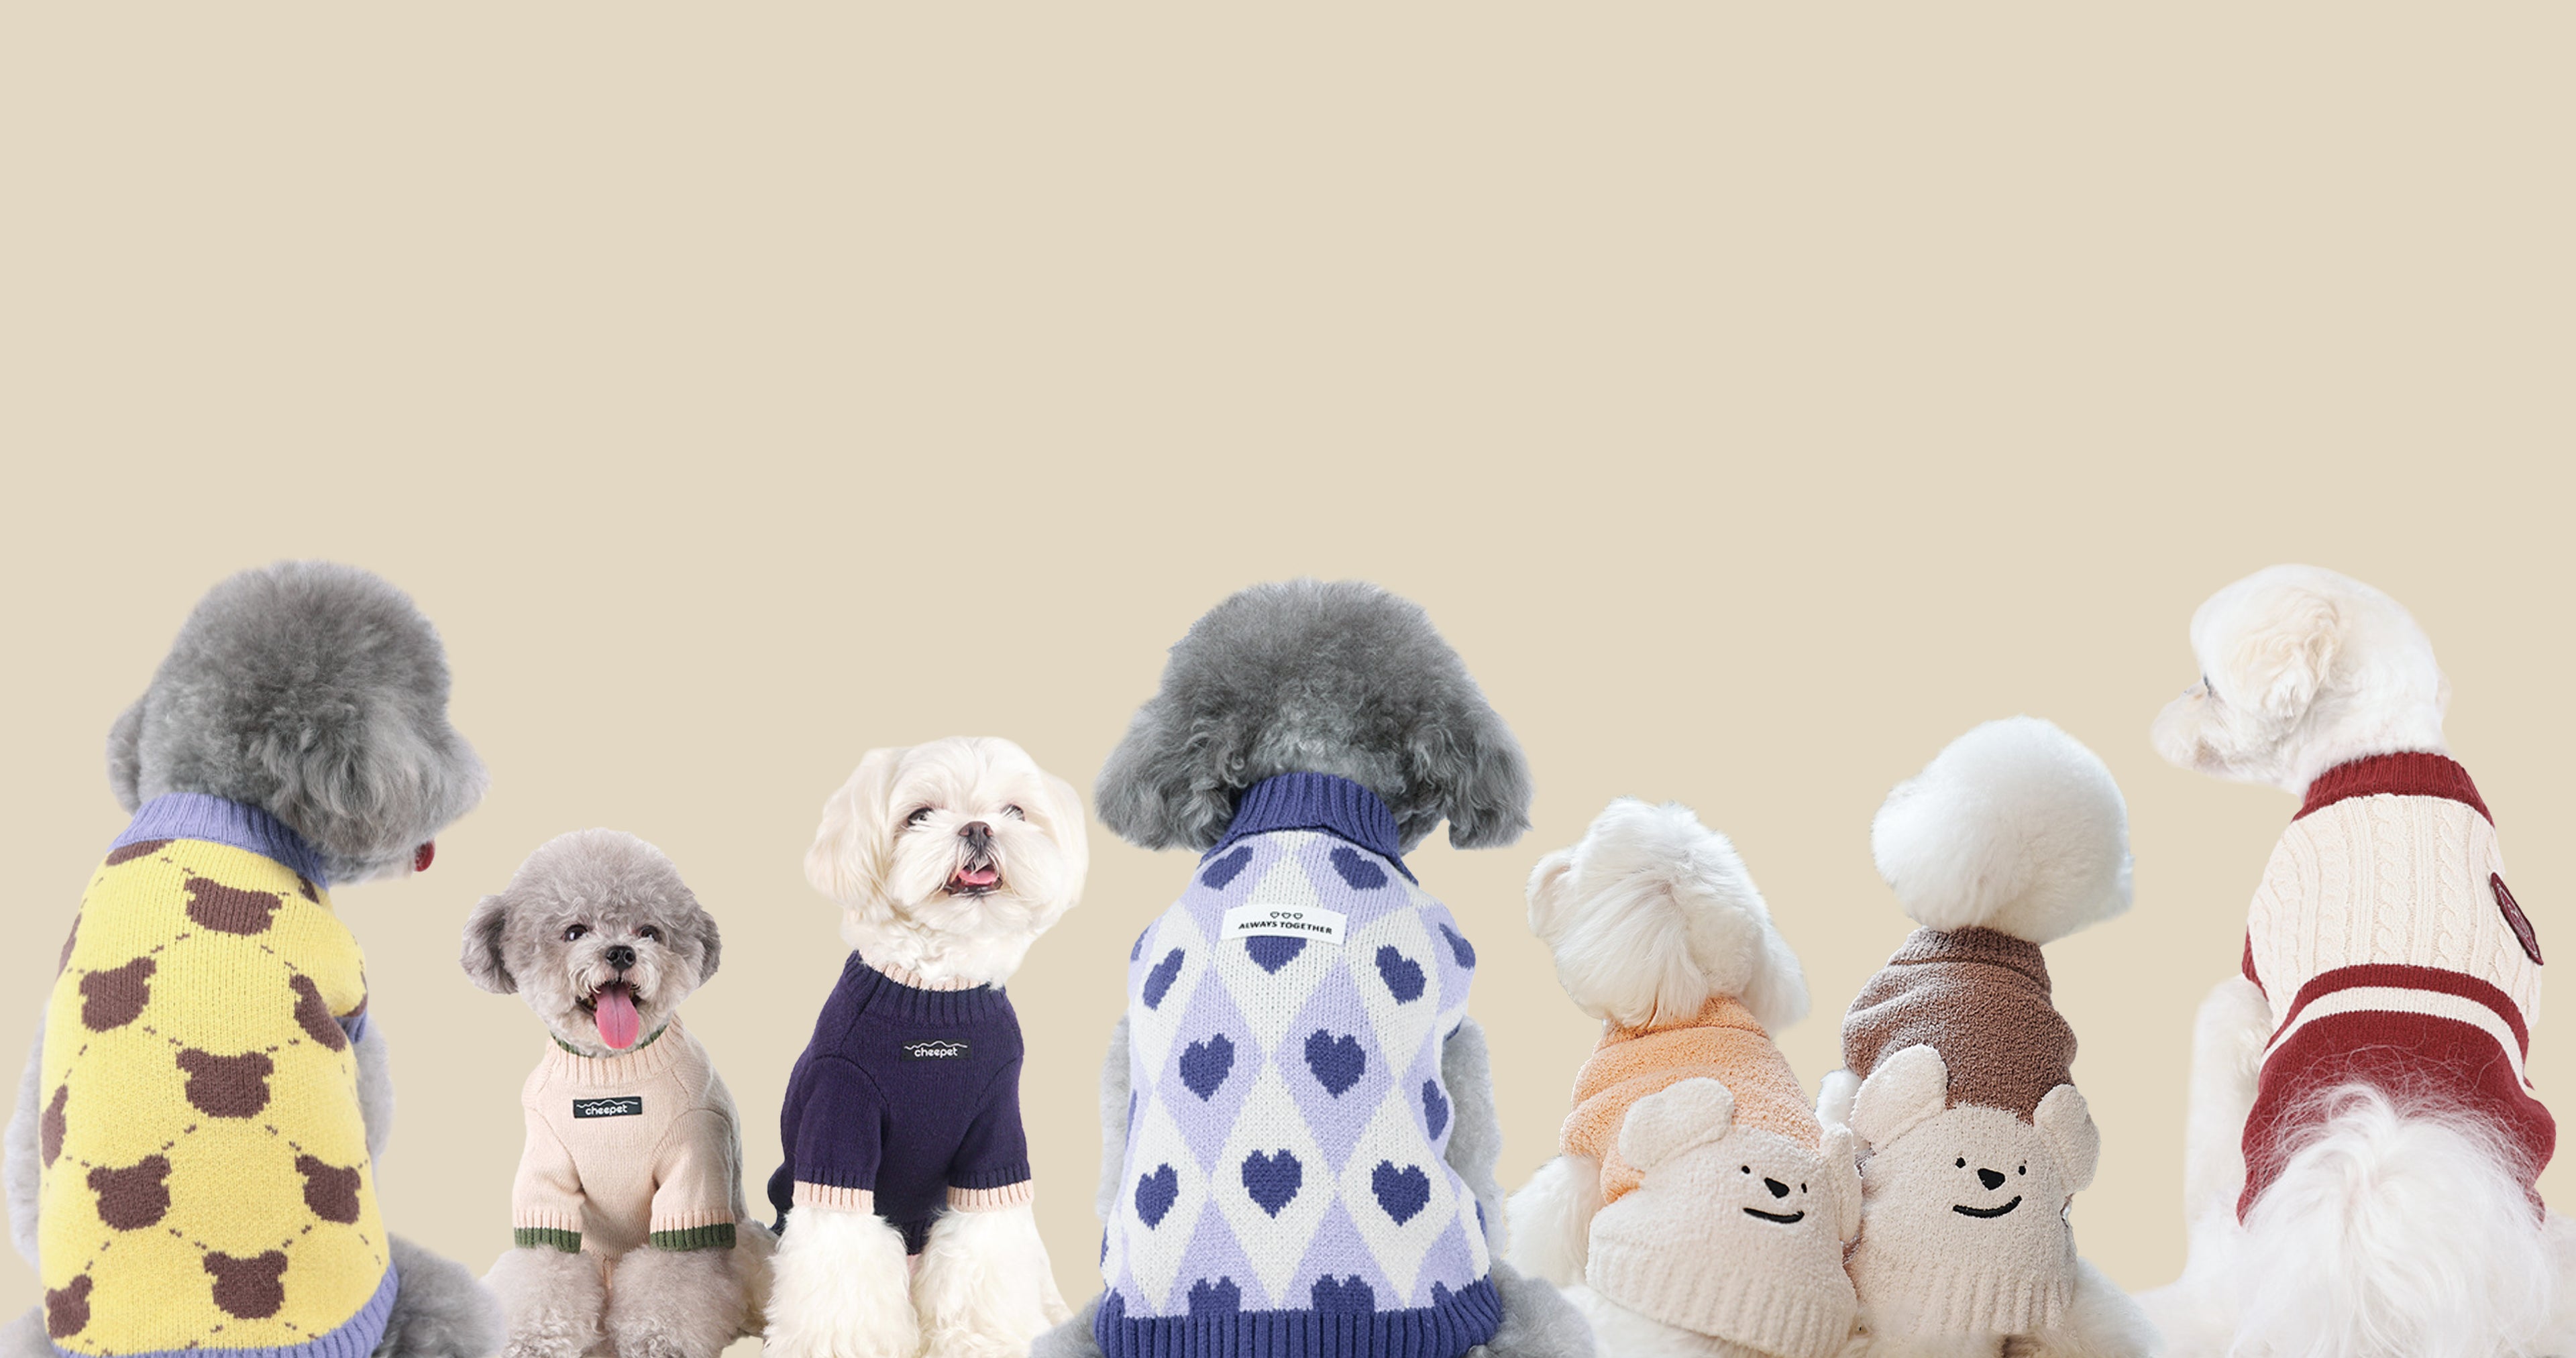 Slideshow: A row of dogs, all of them wearing all kinds of sweaters